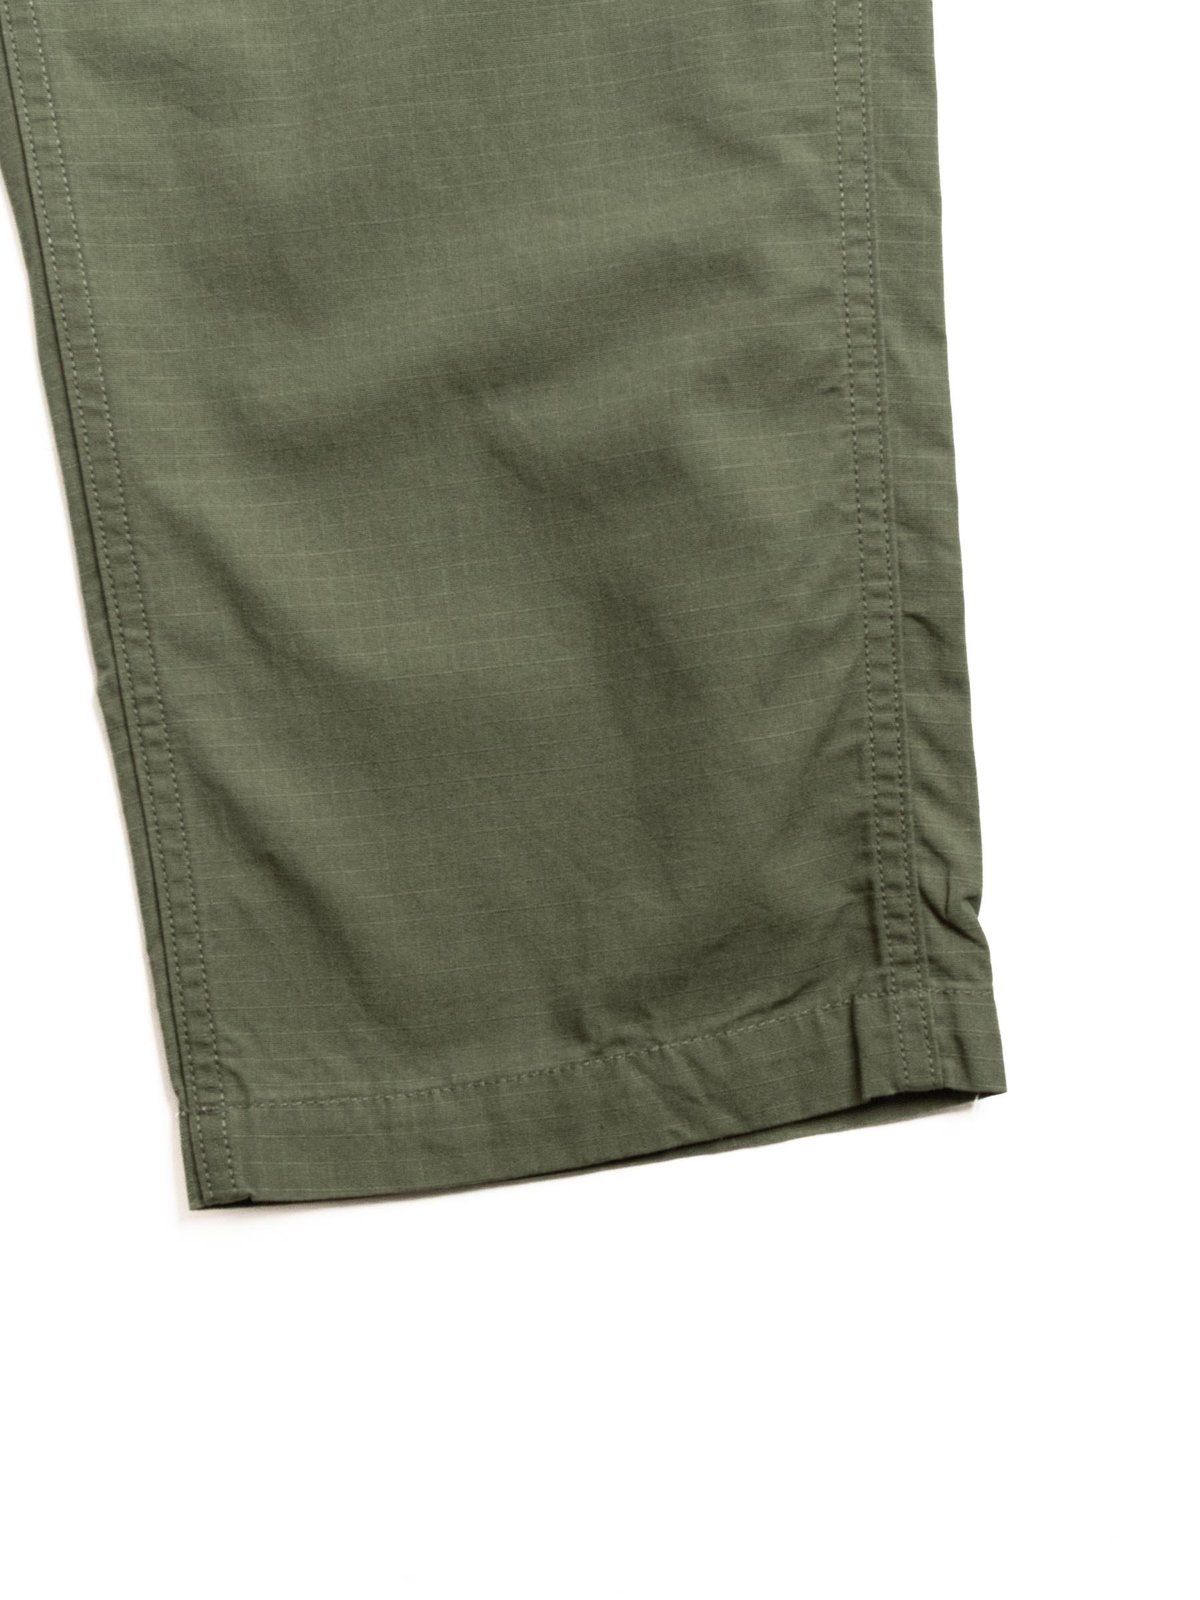 FATIGUE PANT OLIVE COTTON RIPSTOP - Image 5